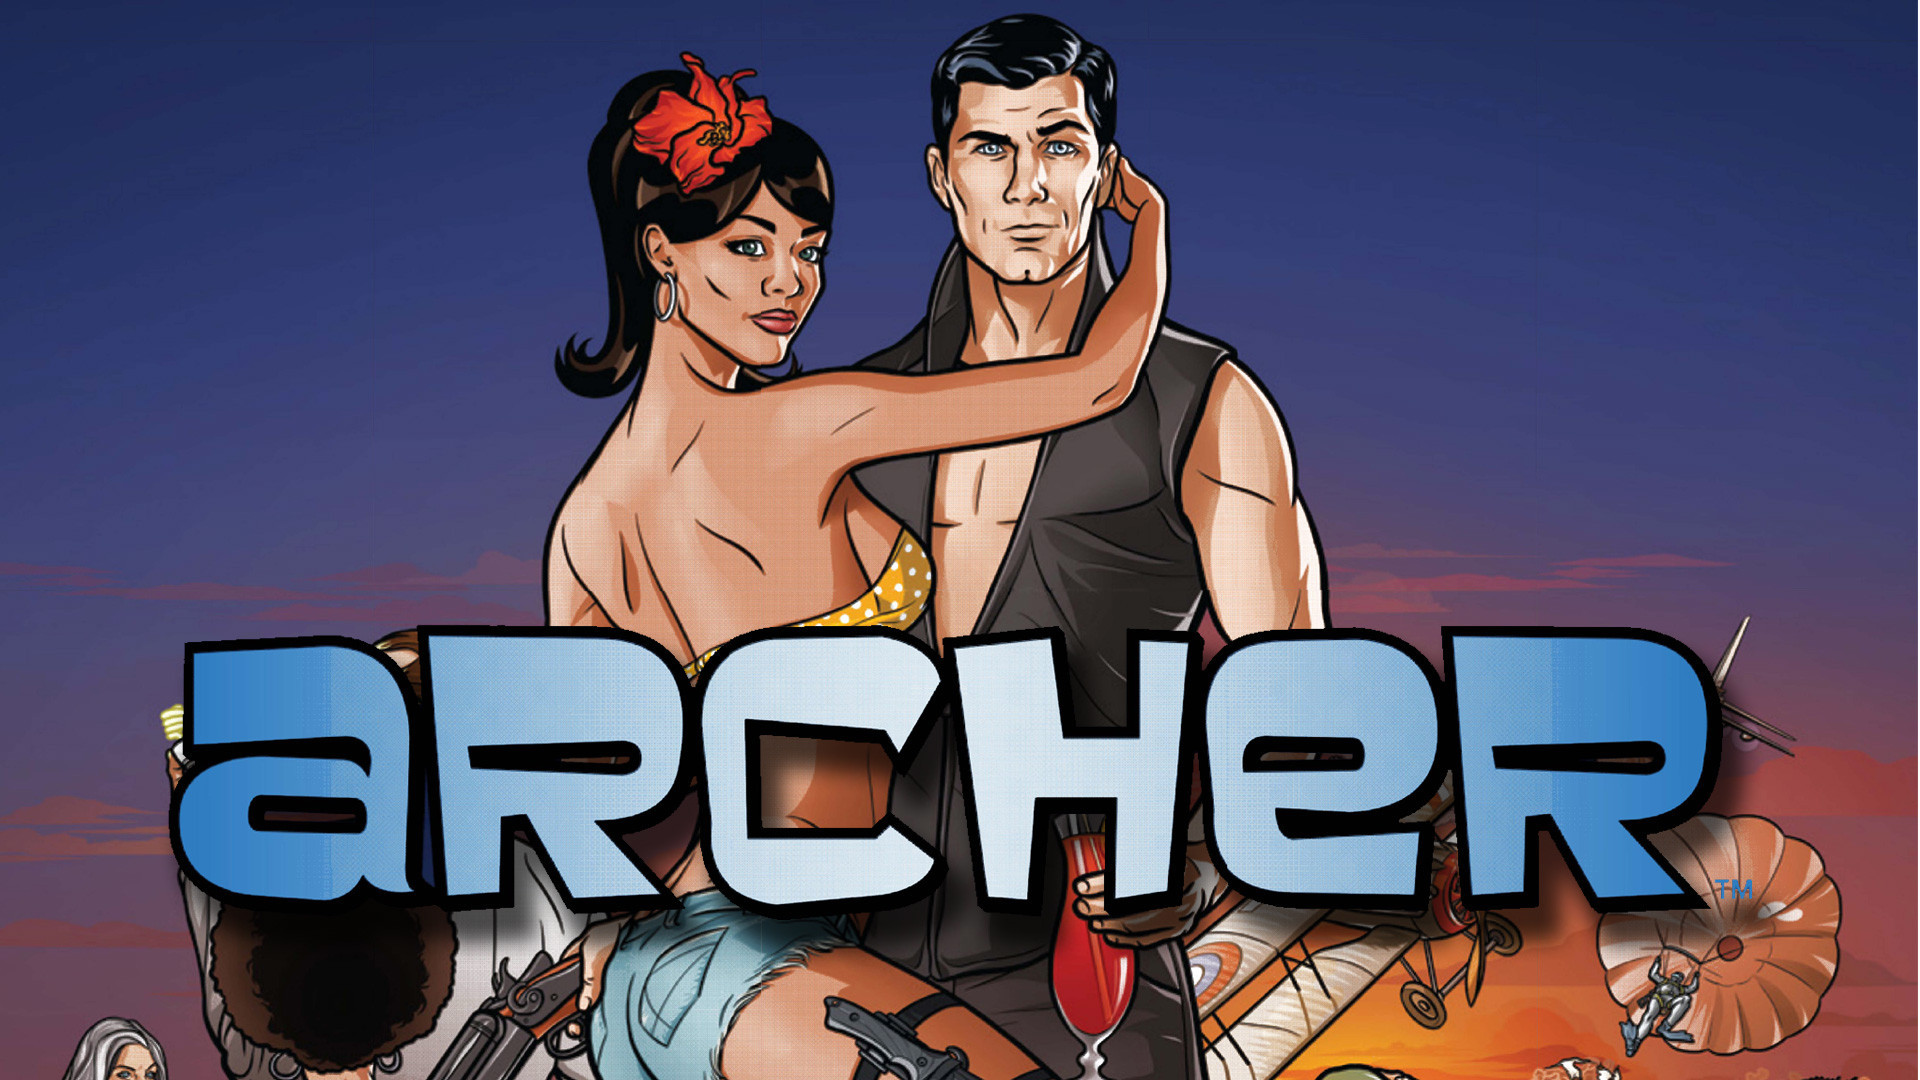 Archer wallpapers desktop backgrounds hd pictures and images